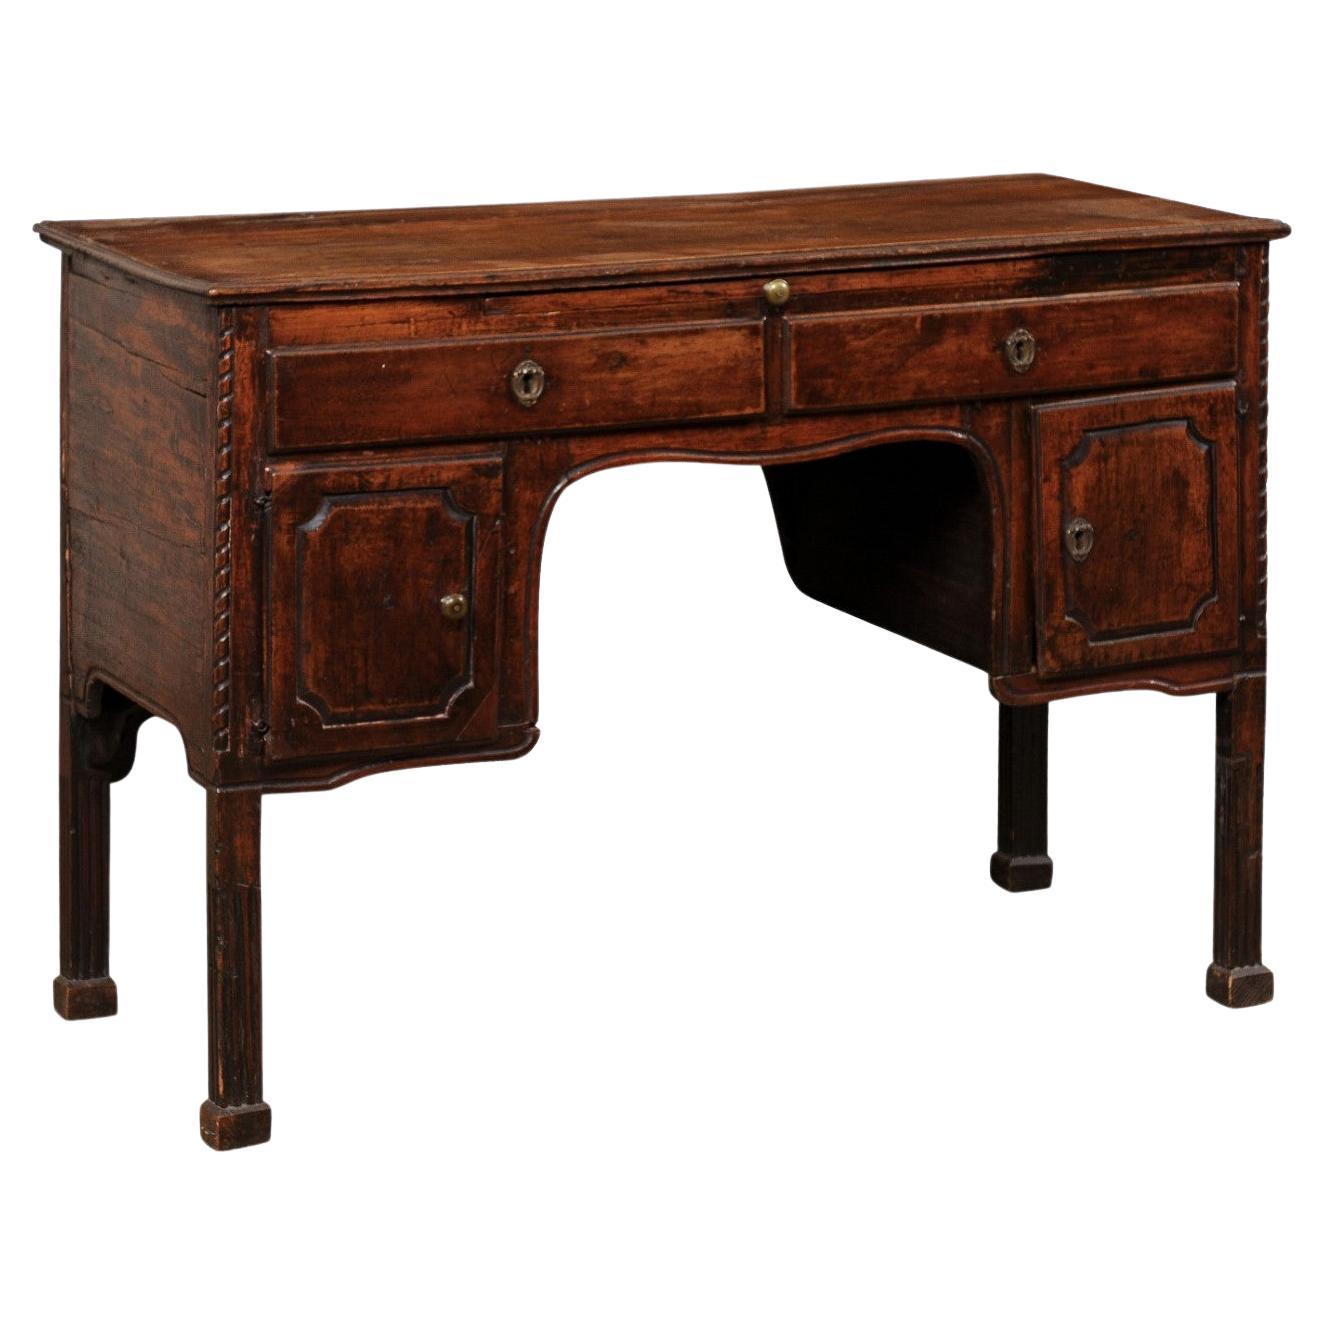 Italian Carved-Wood Desk W/Pullout Writing Shelf & Great Storage, 19th Century For Sale